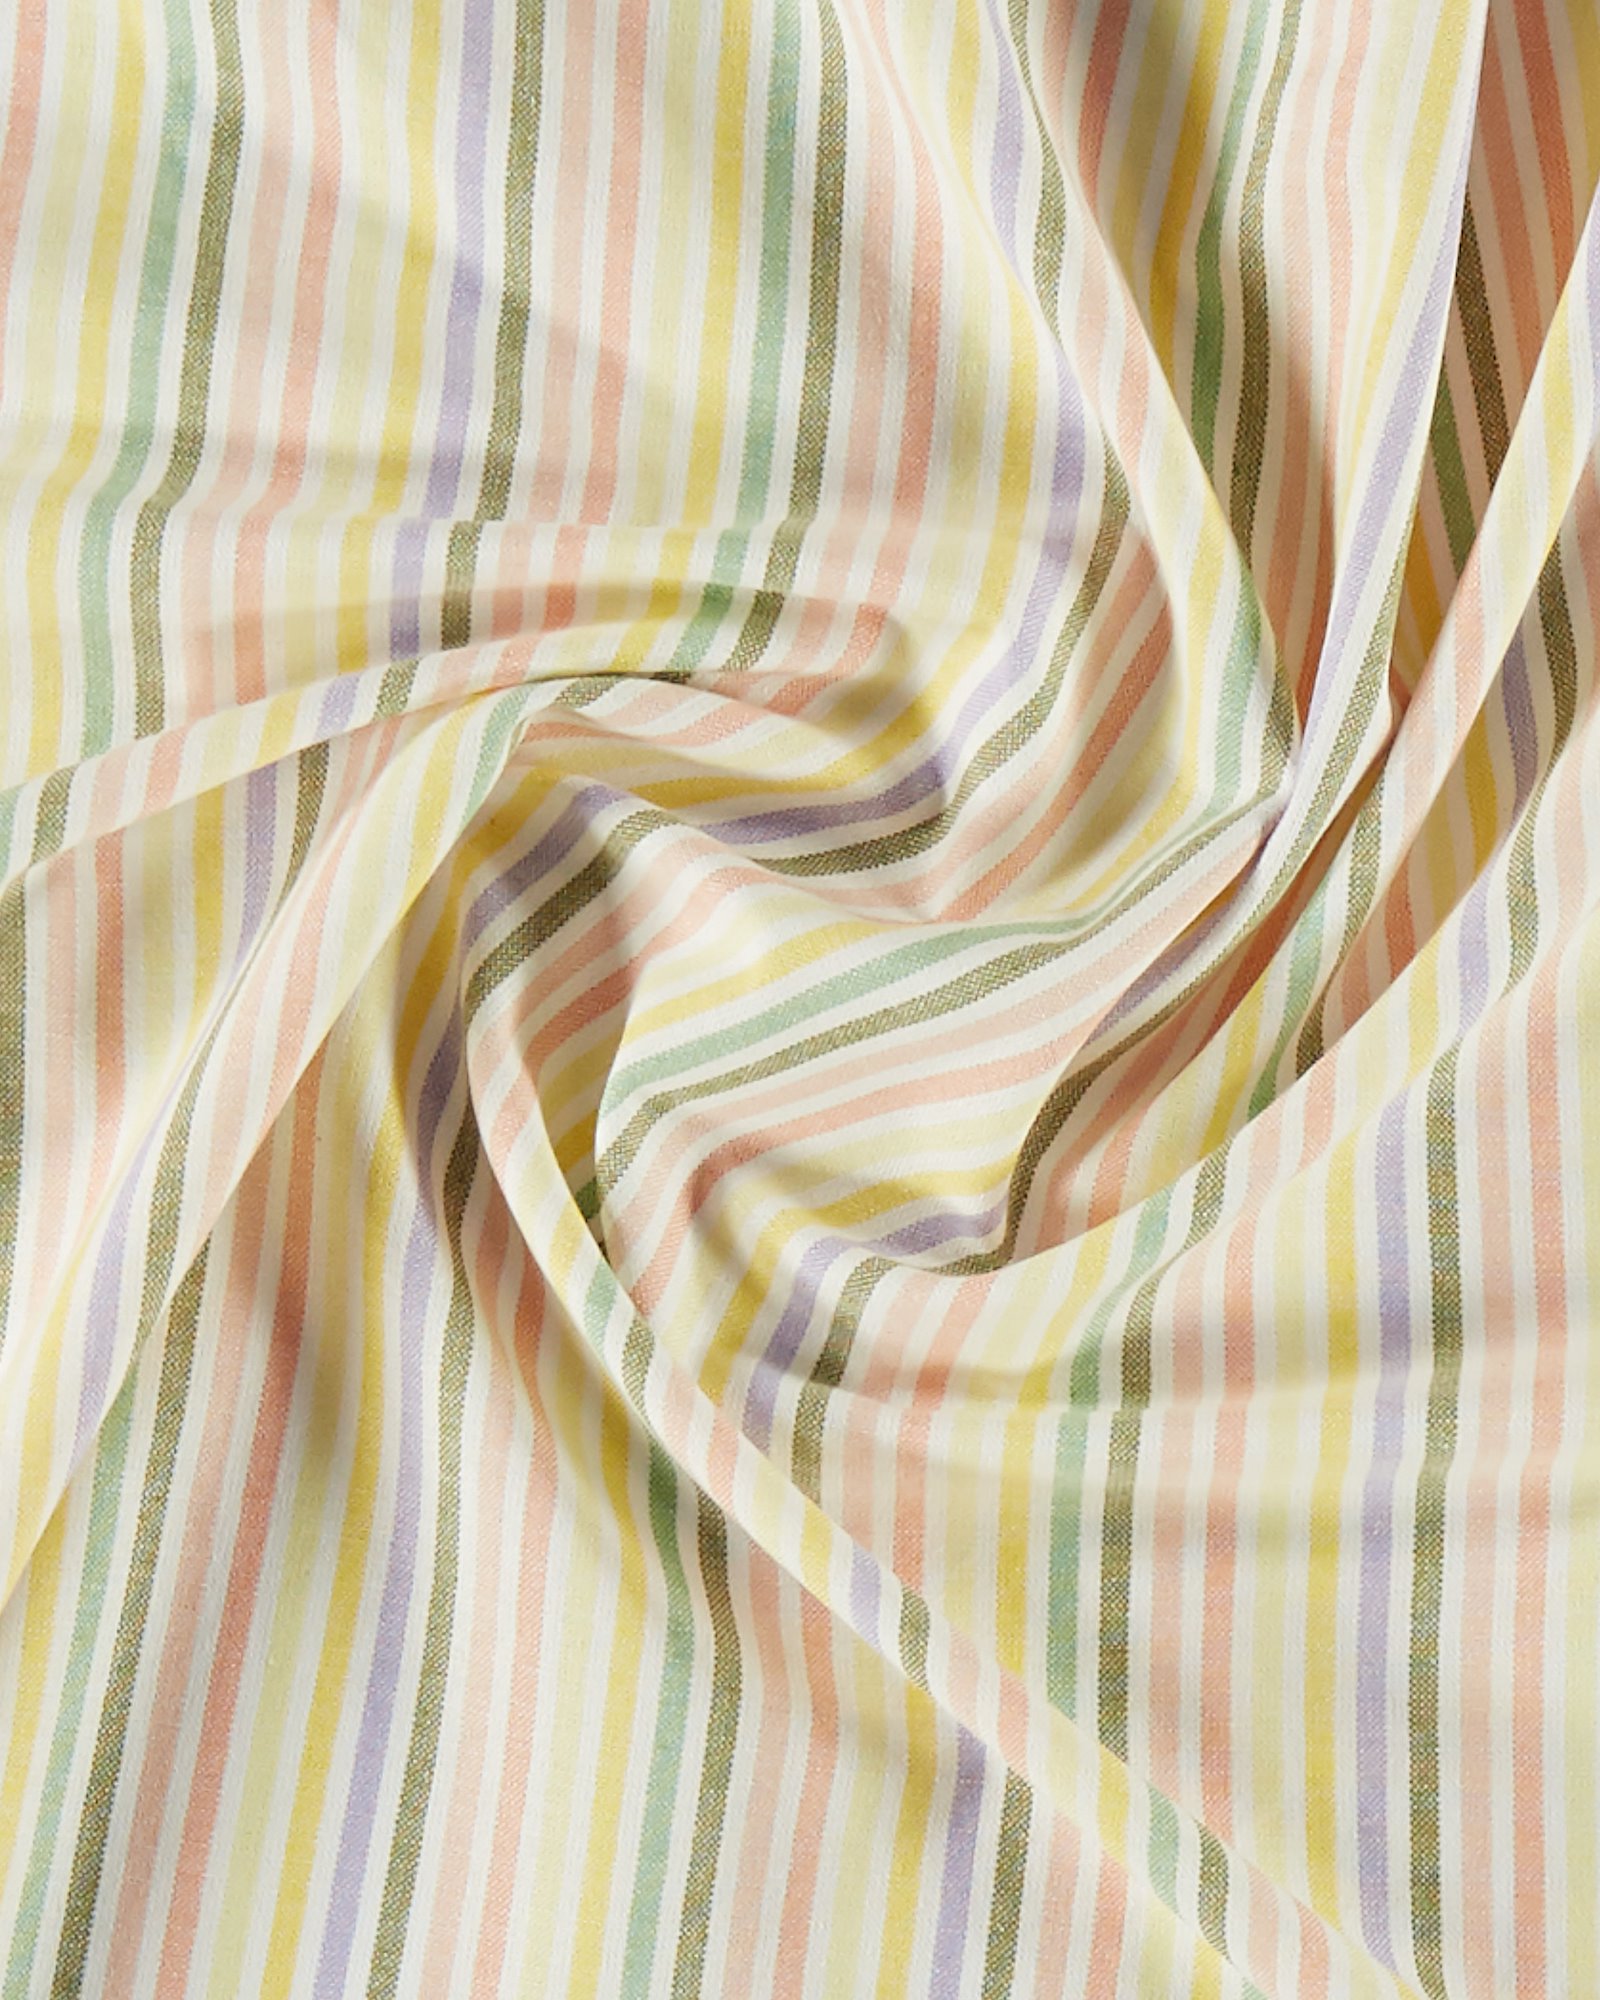 Woven cotton w multicolored YD stripes 816304_pack